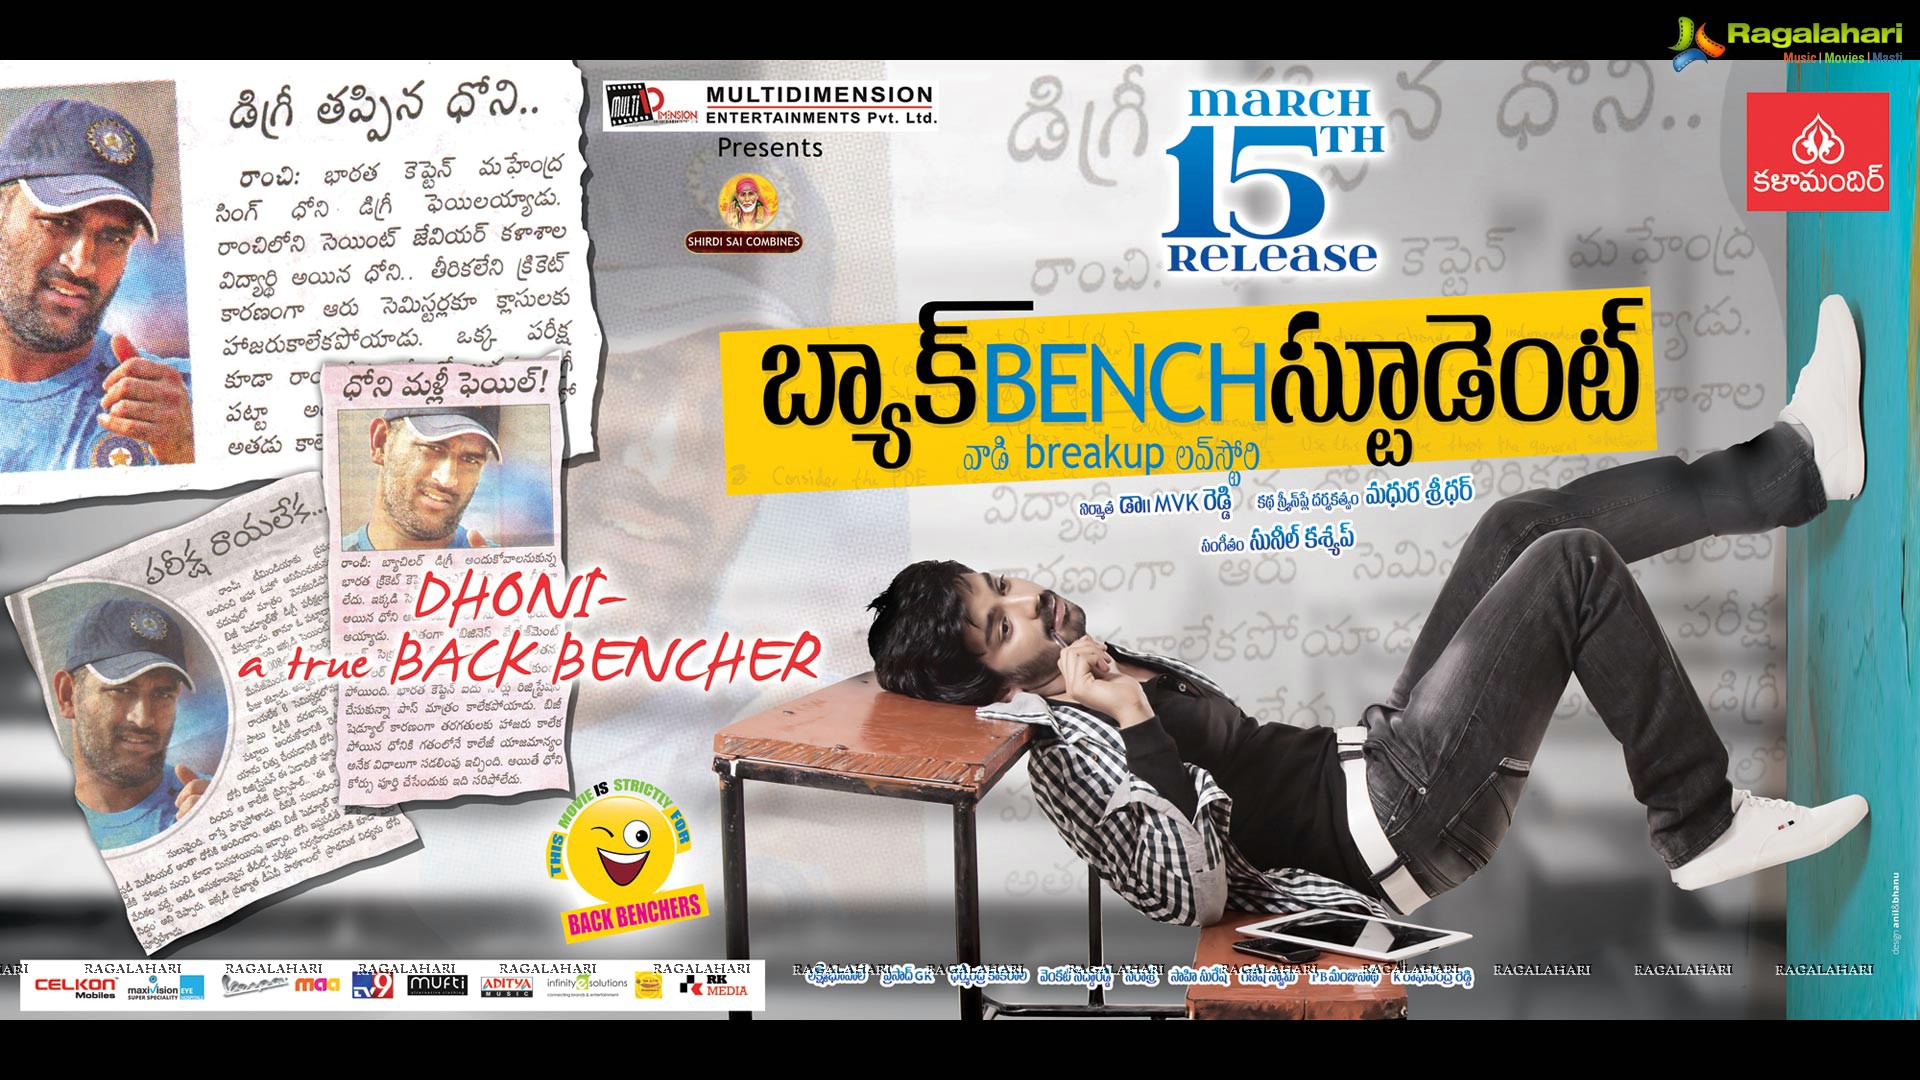 Back Bench Student March 15th release poster